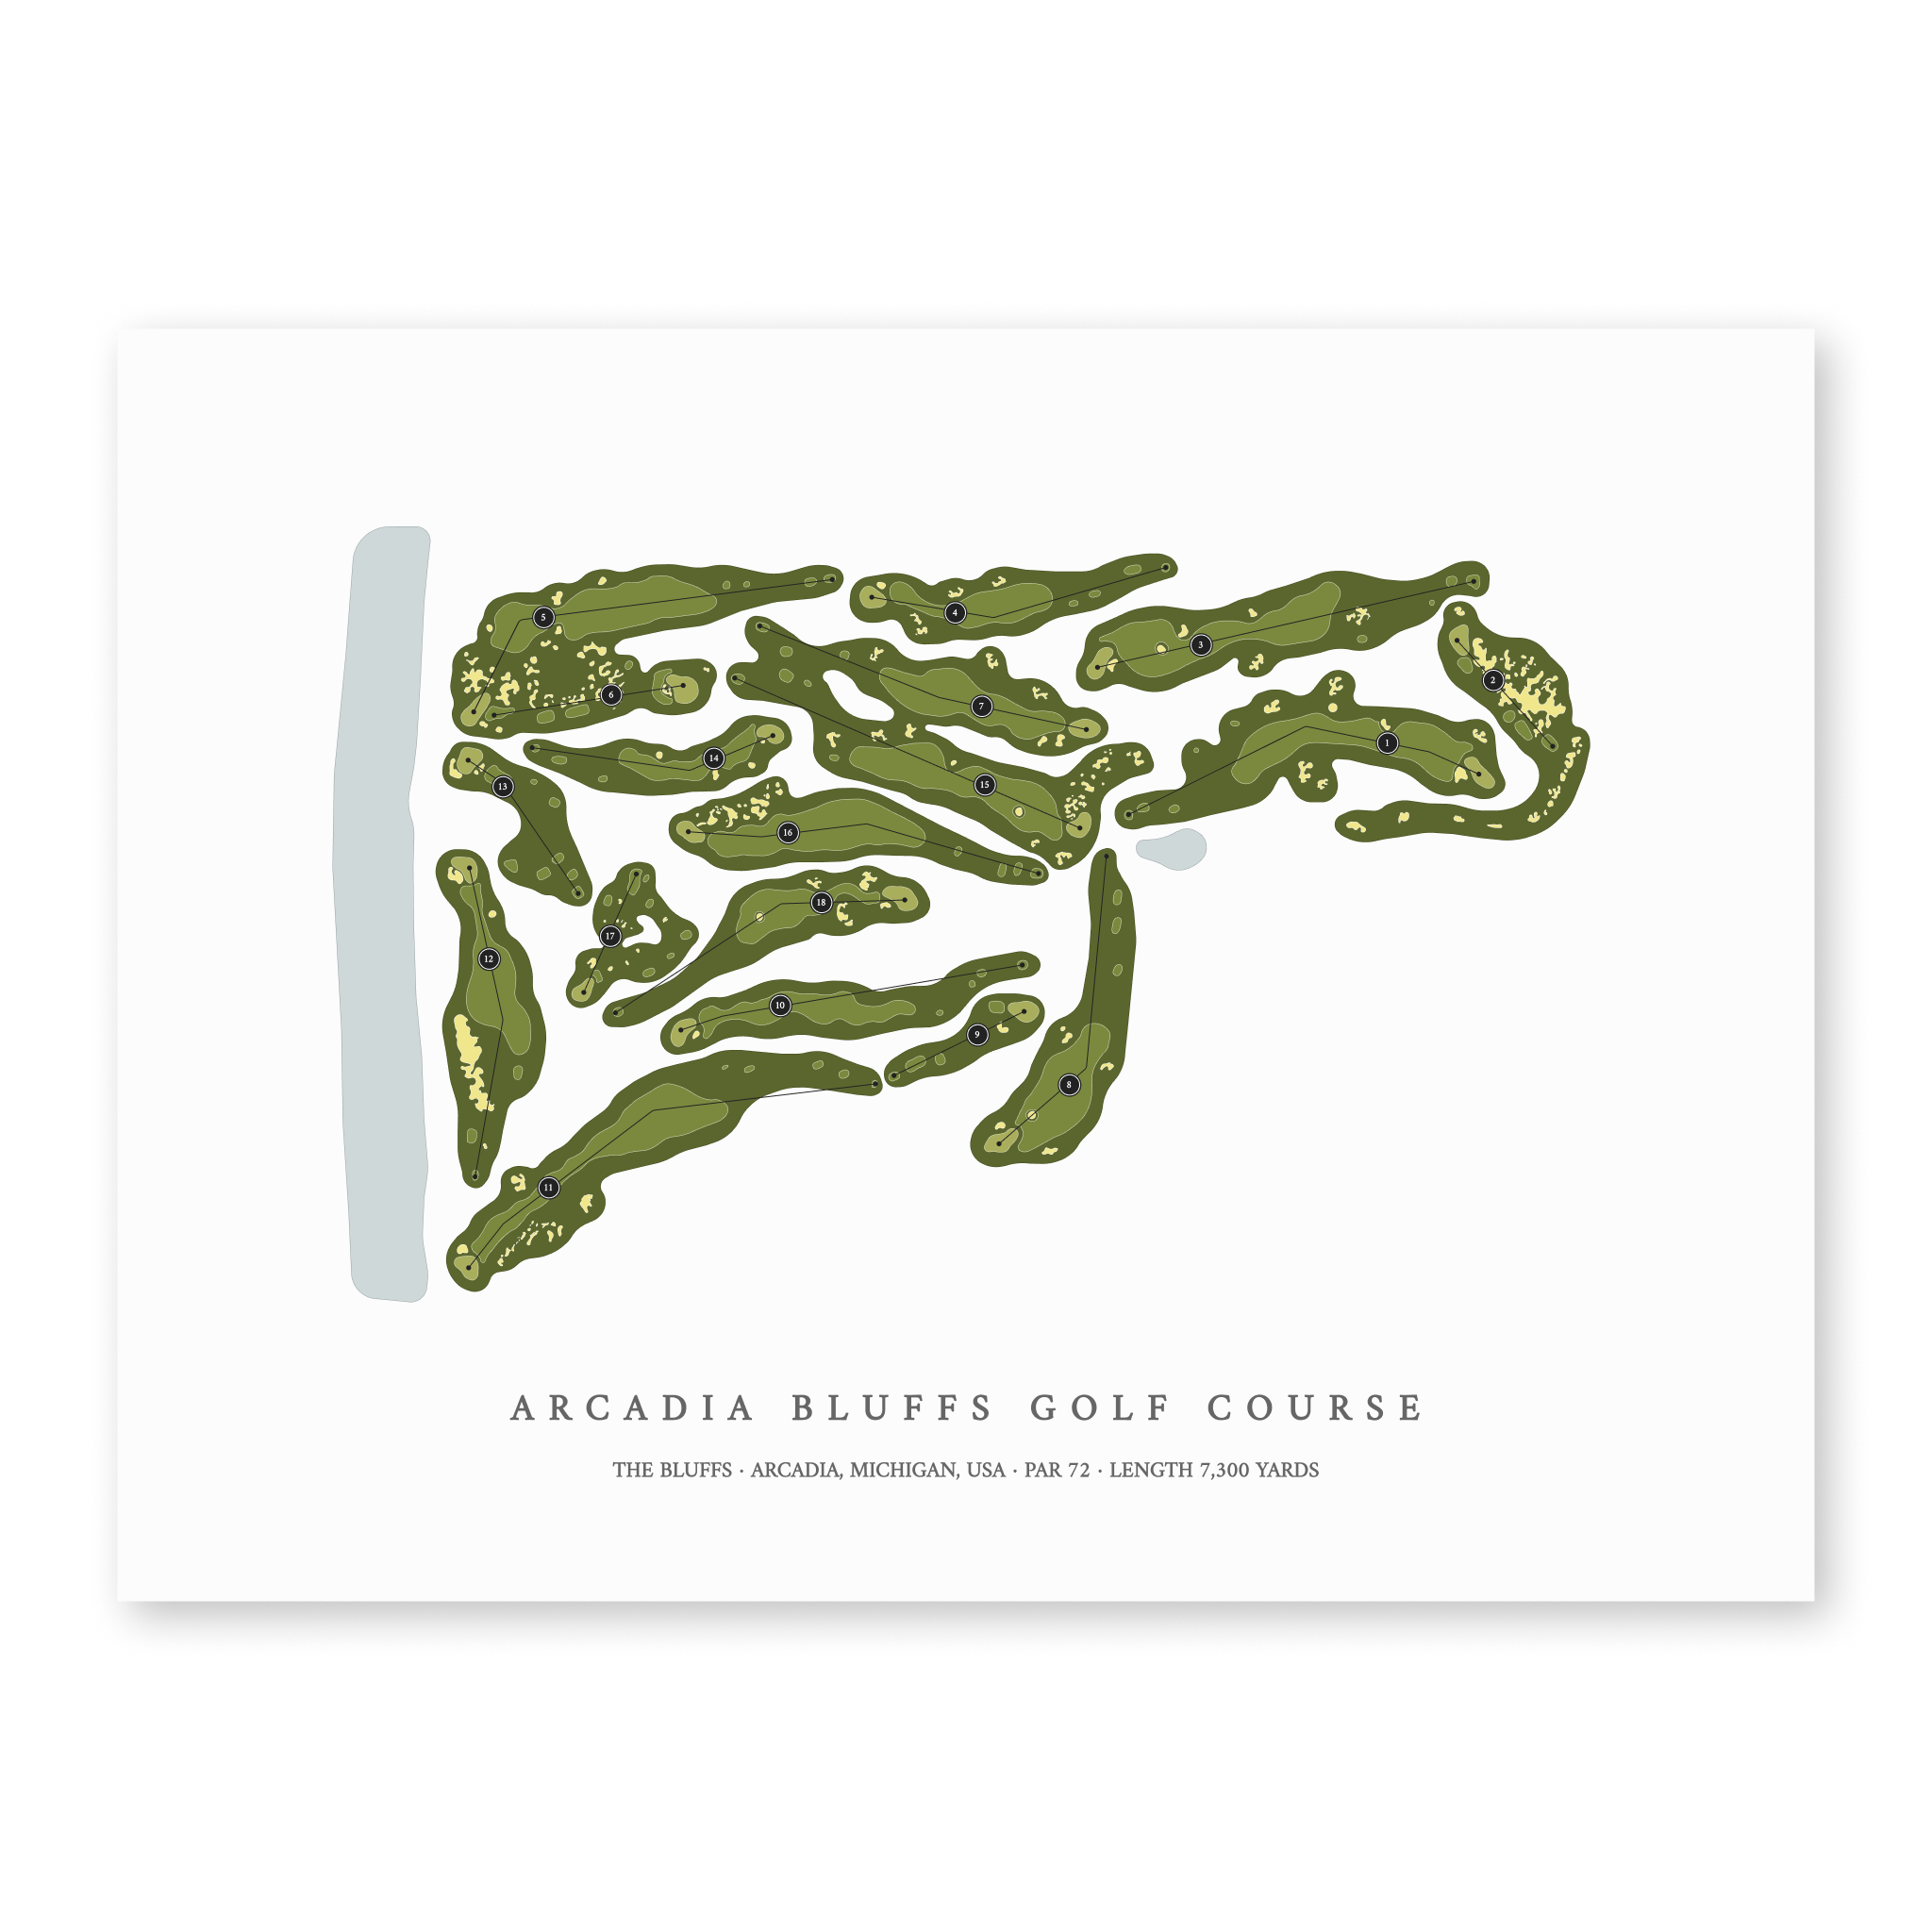 Arcadia Bluffs Golf Course - The Buffs| Golf Course Print | Unframed With Hole Numbers #hole numbers_yes